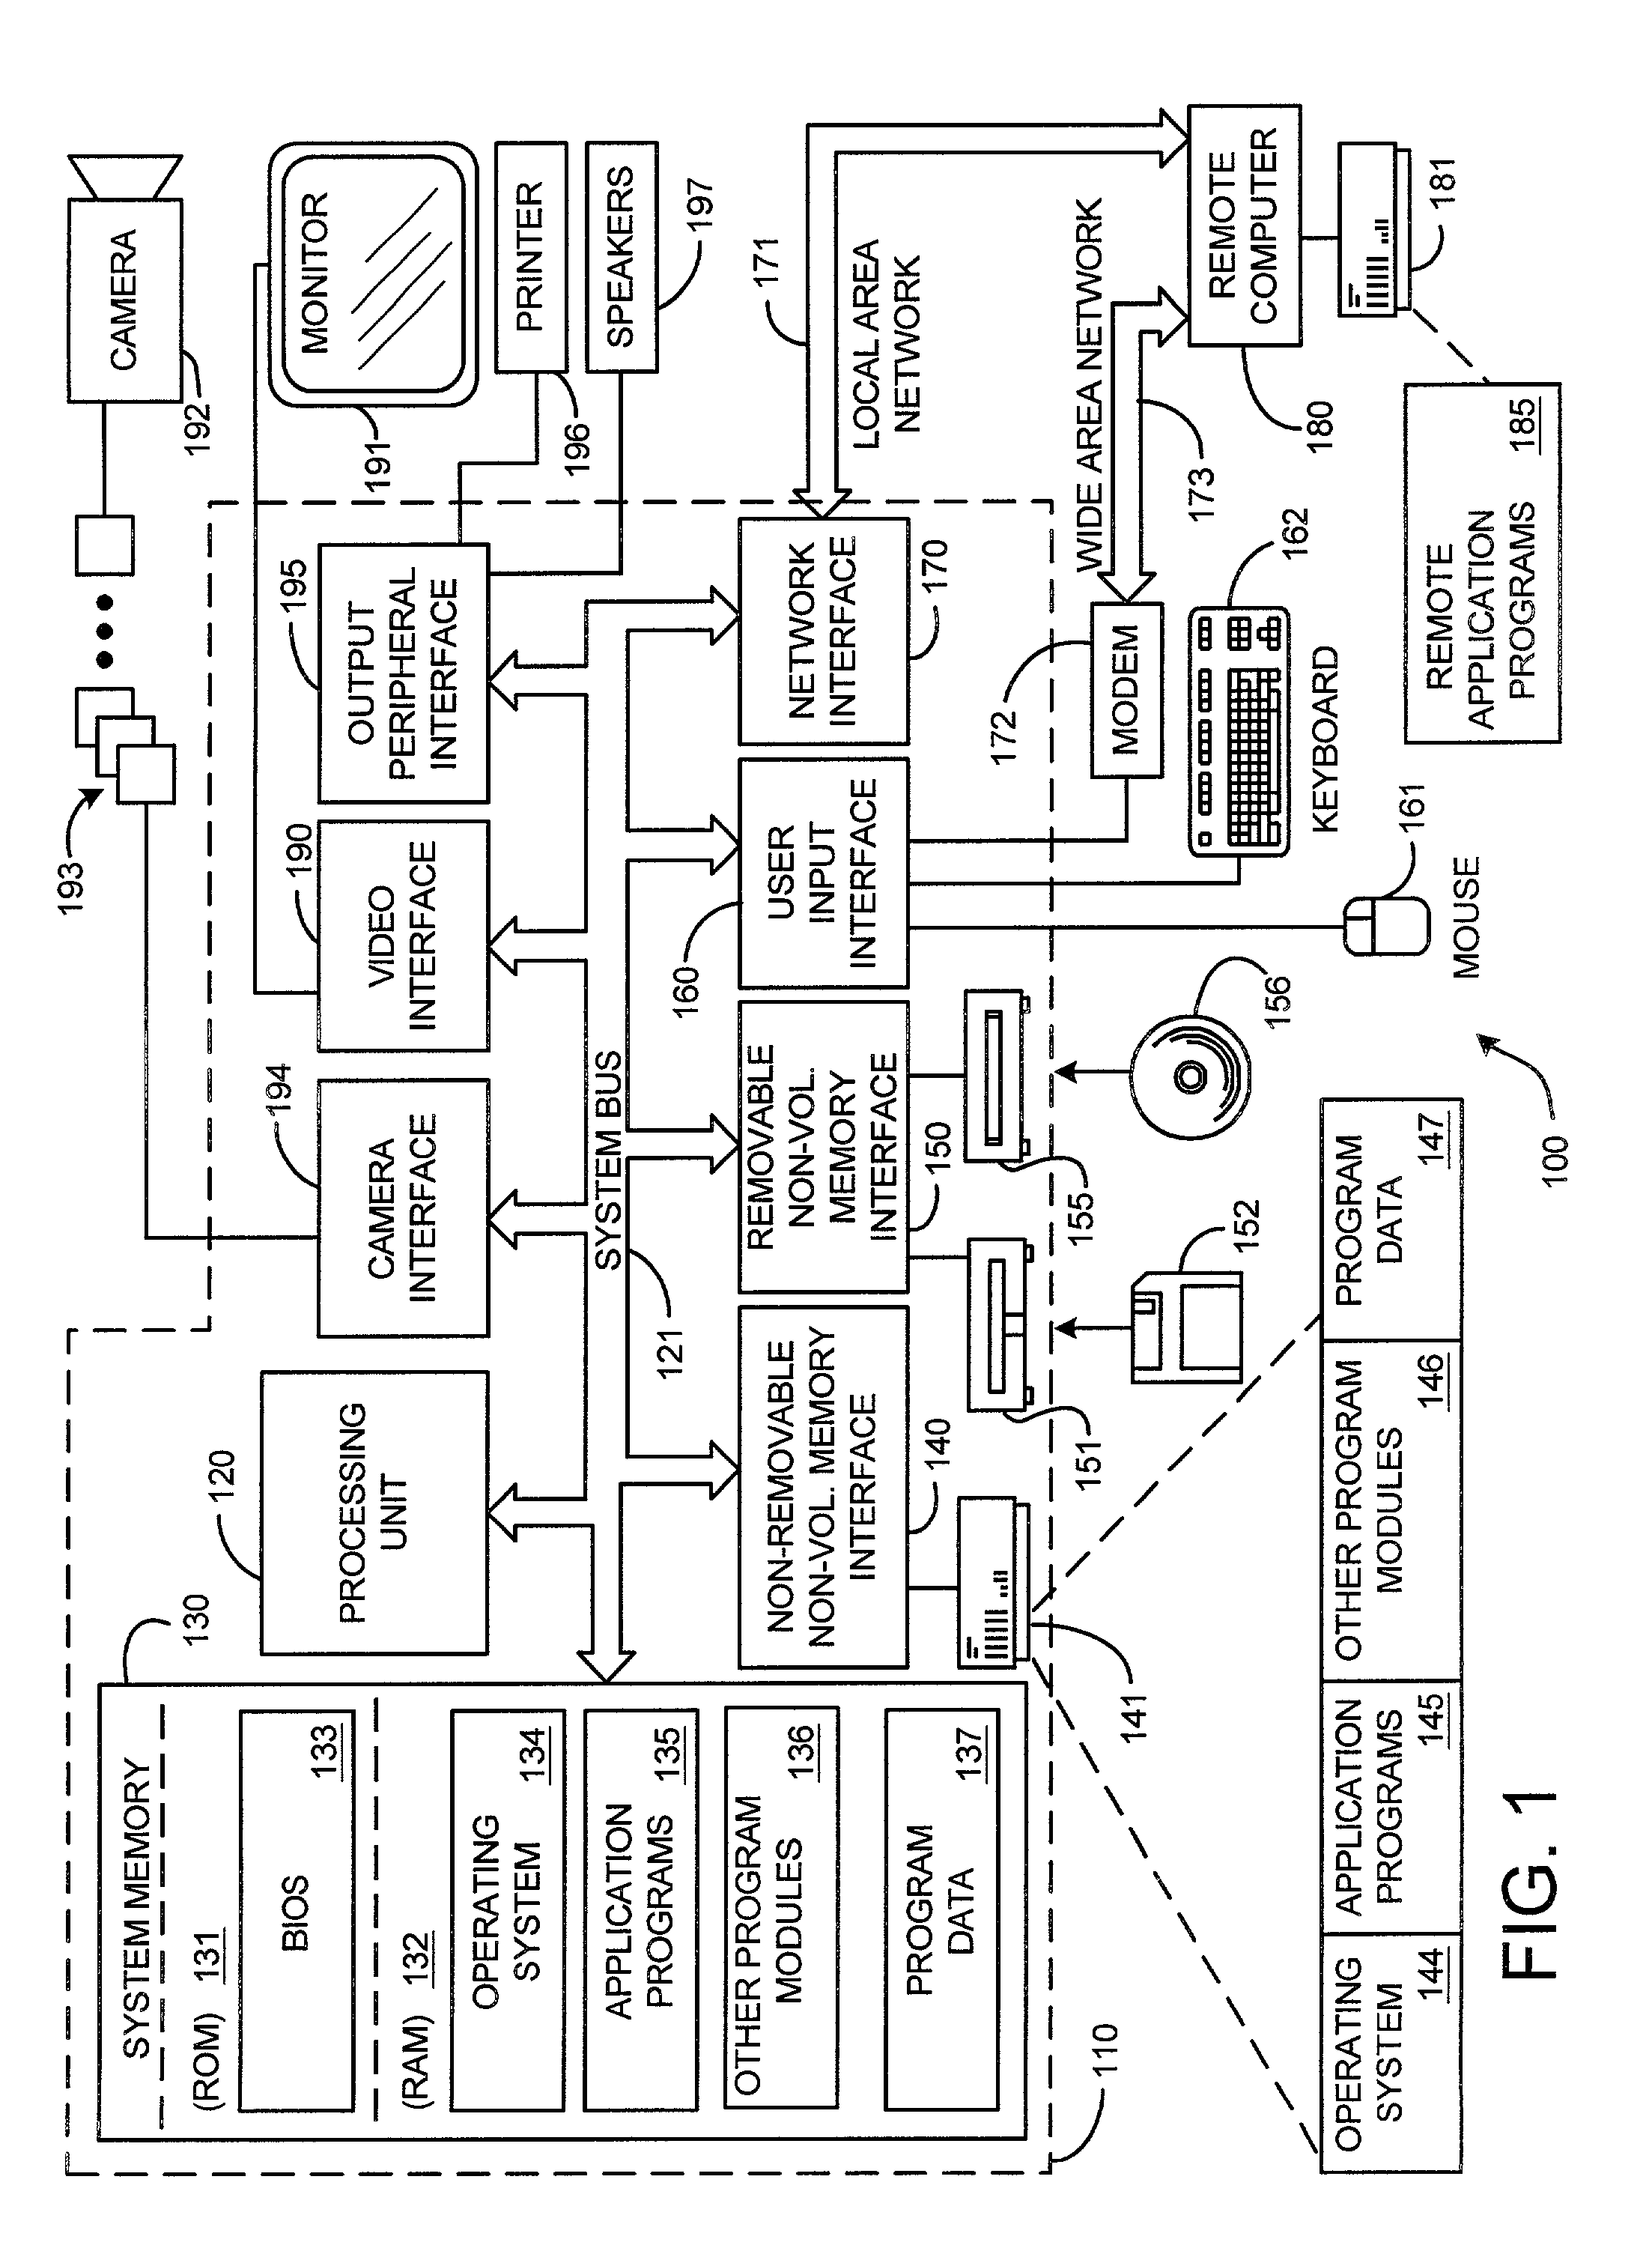 System and method for mode-based multi-hypothesis tracking using parametric contours